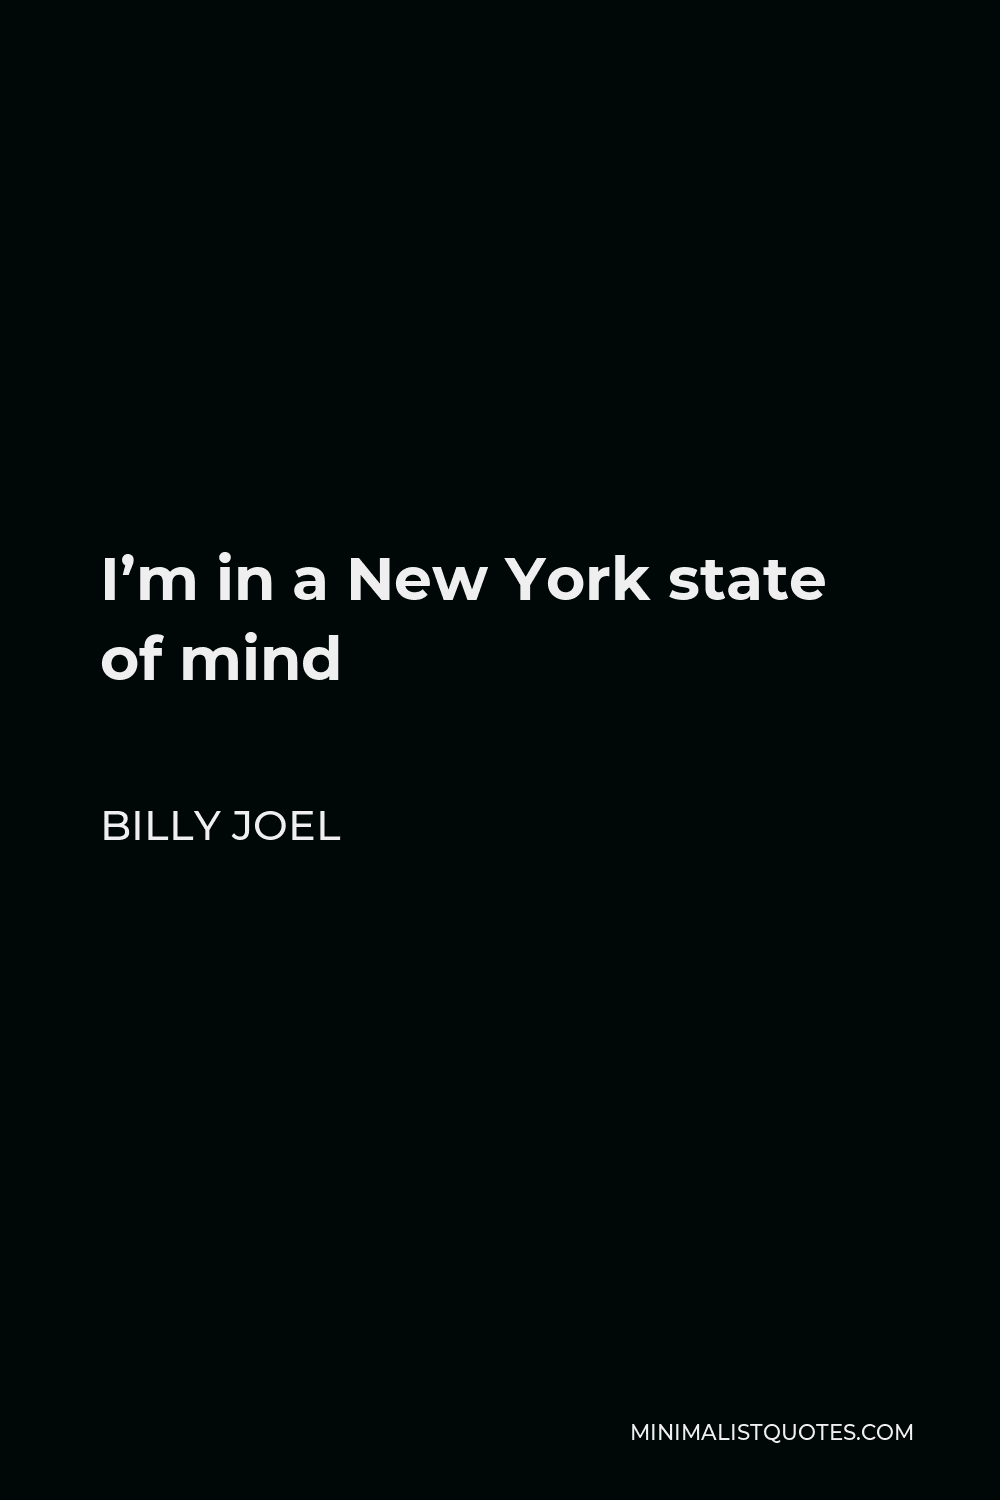 Billy Joel Quote - I’m in a New York state of mind